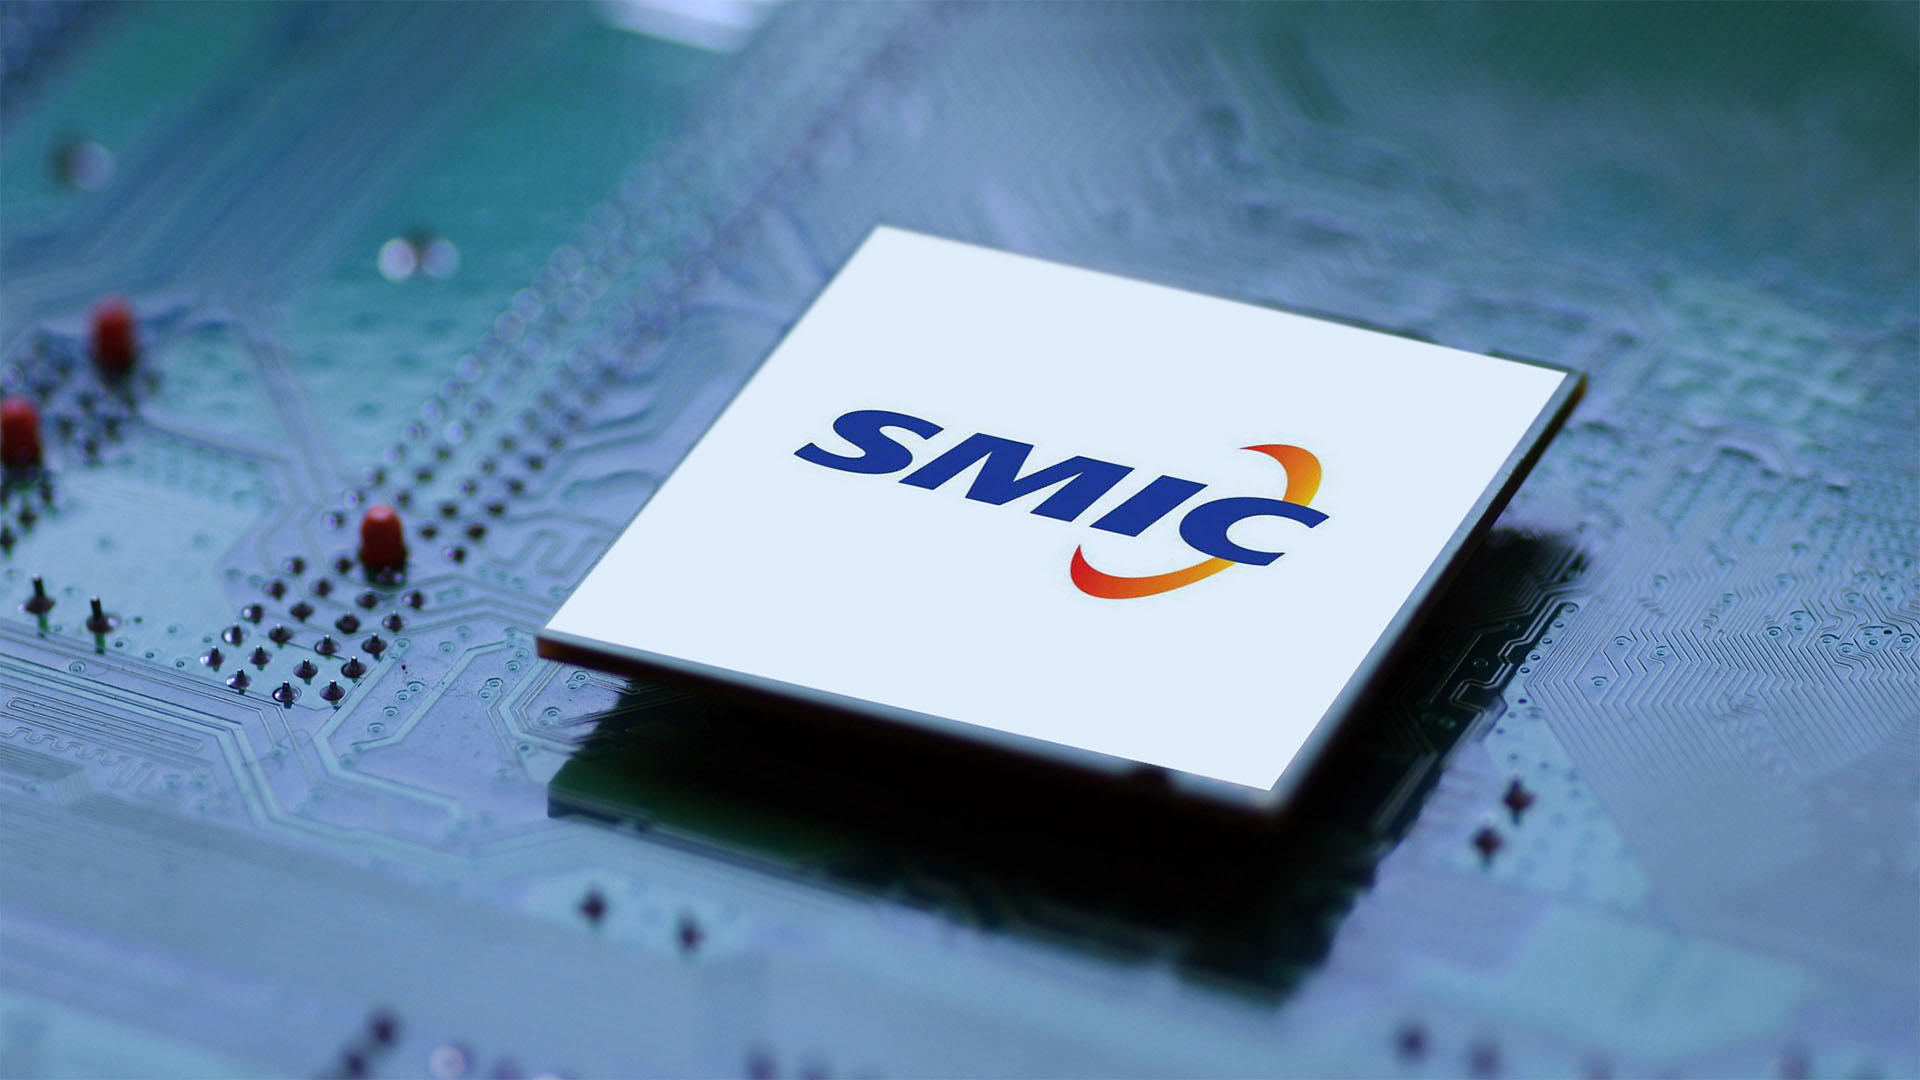 Semiconductor Manufacturing International Corp. (SMIC)